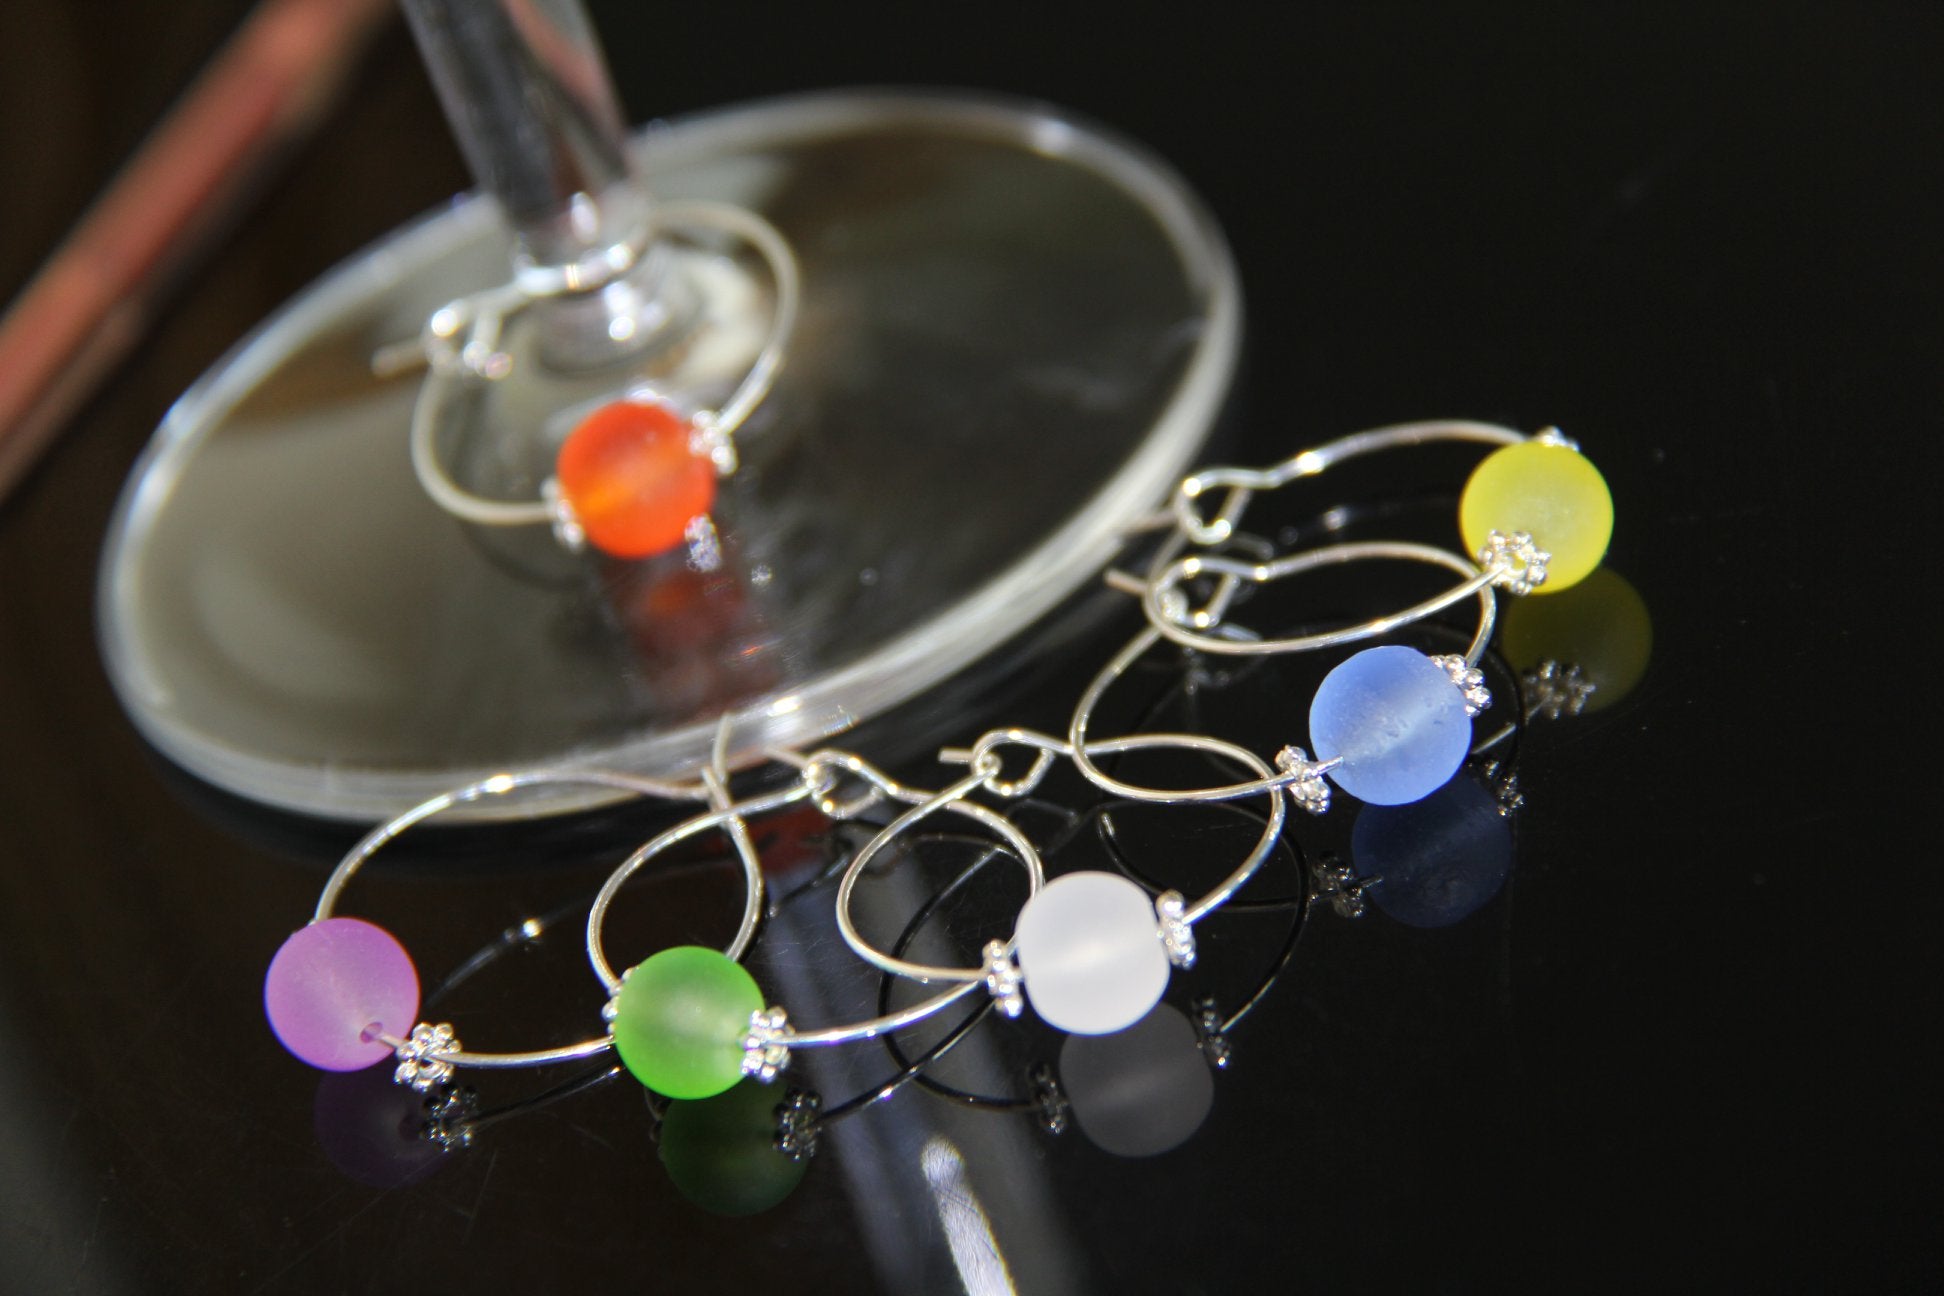 Silver Seaglass Beads - Wine Glass Rings